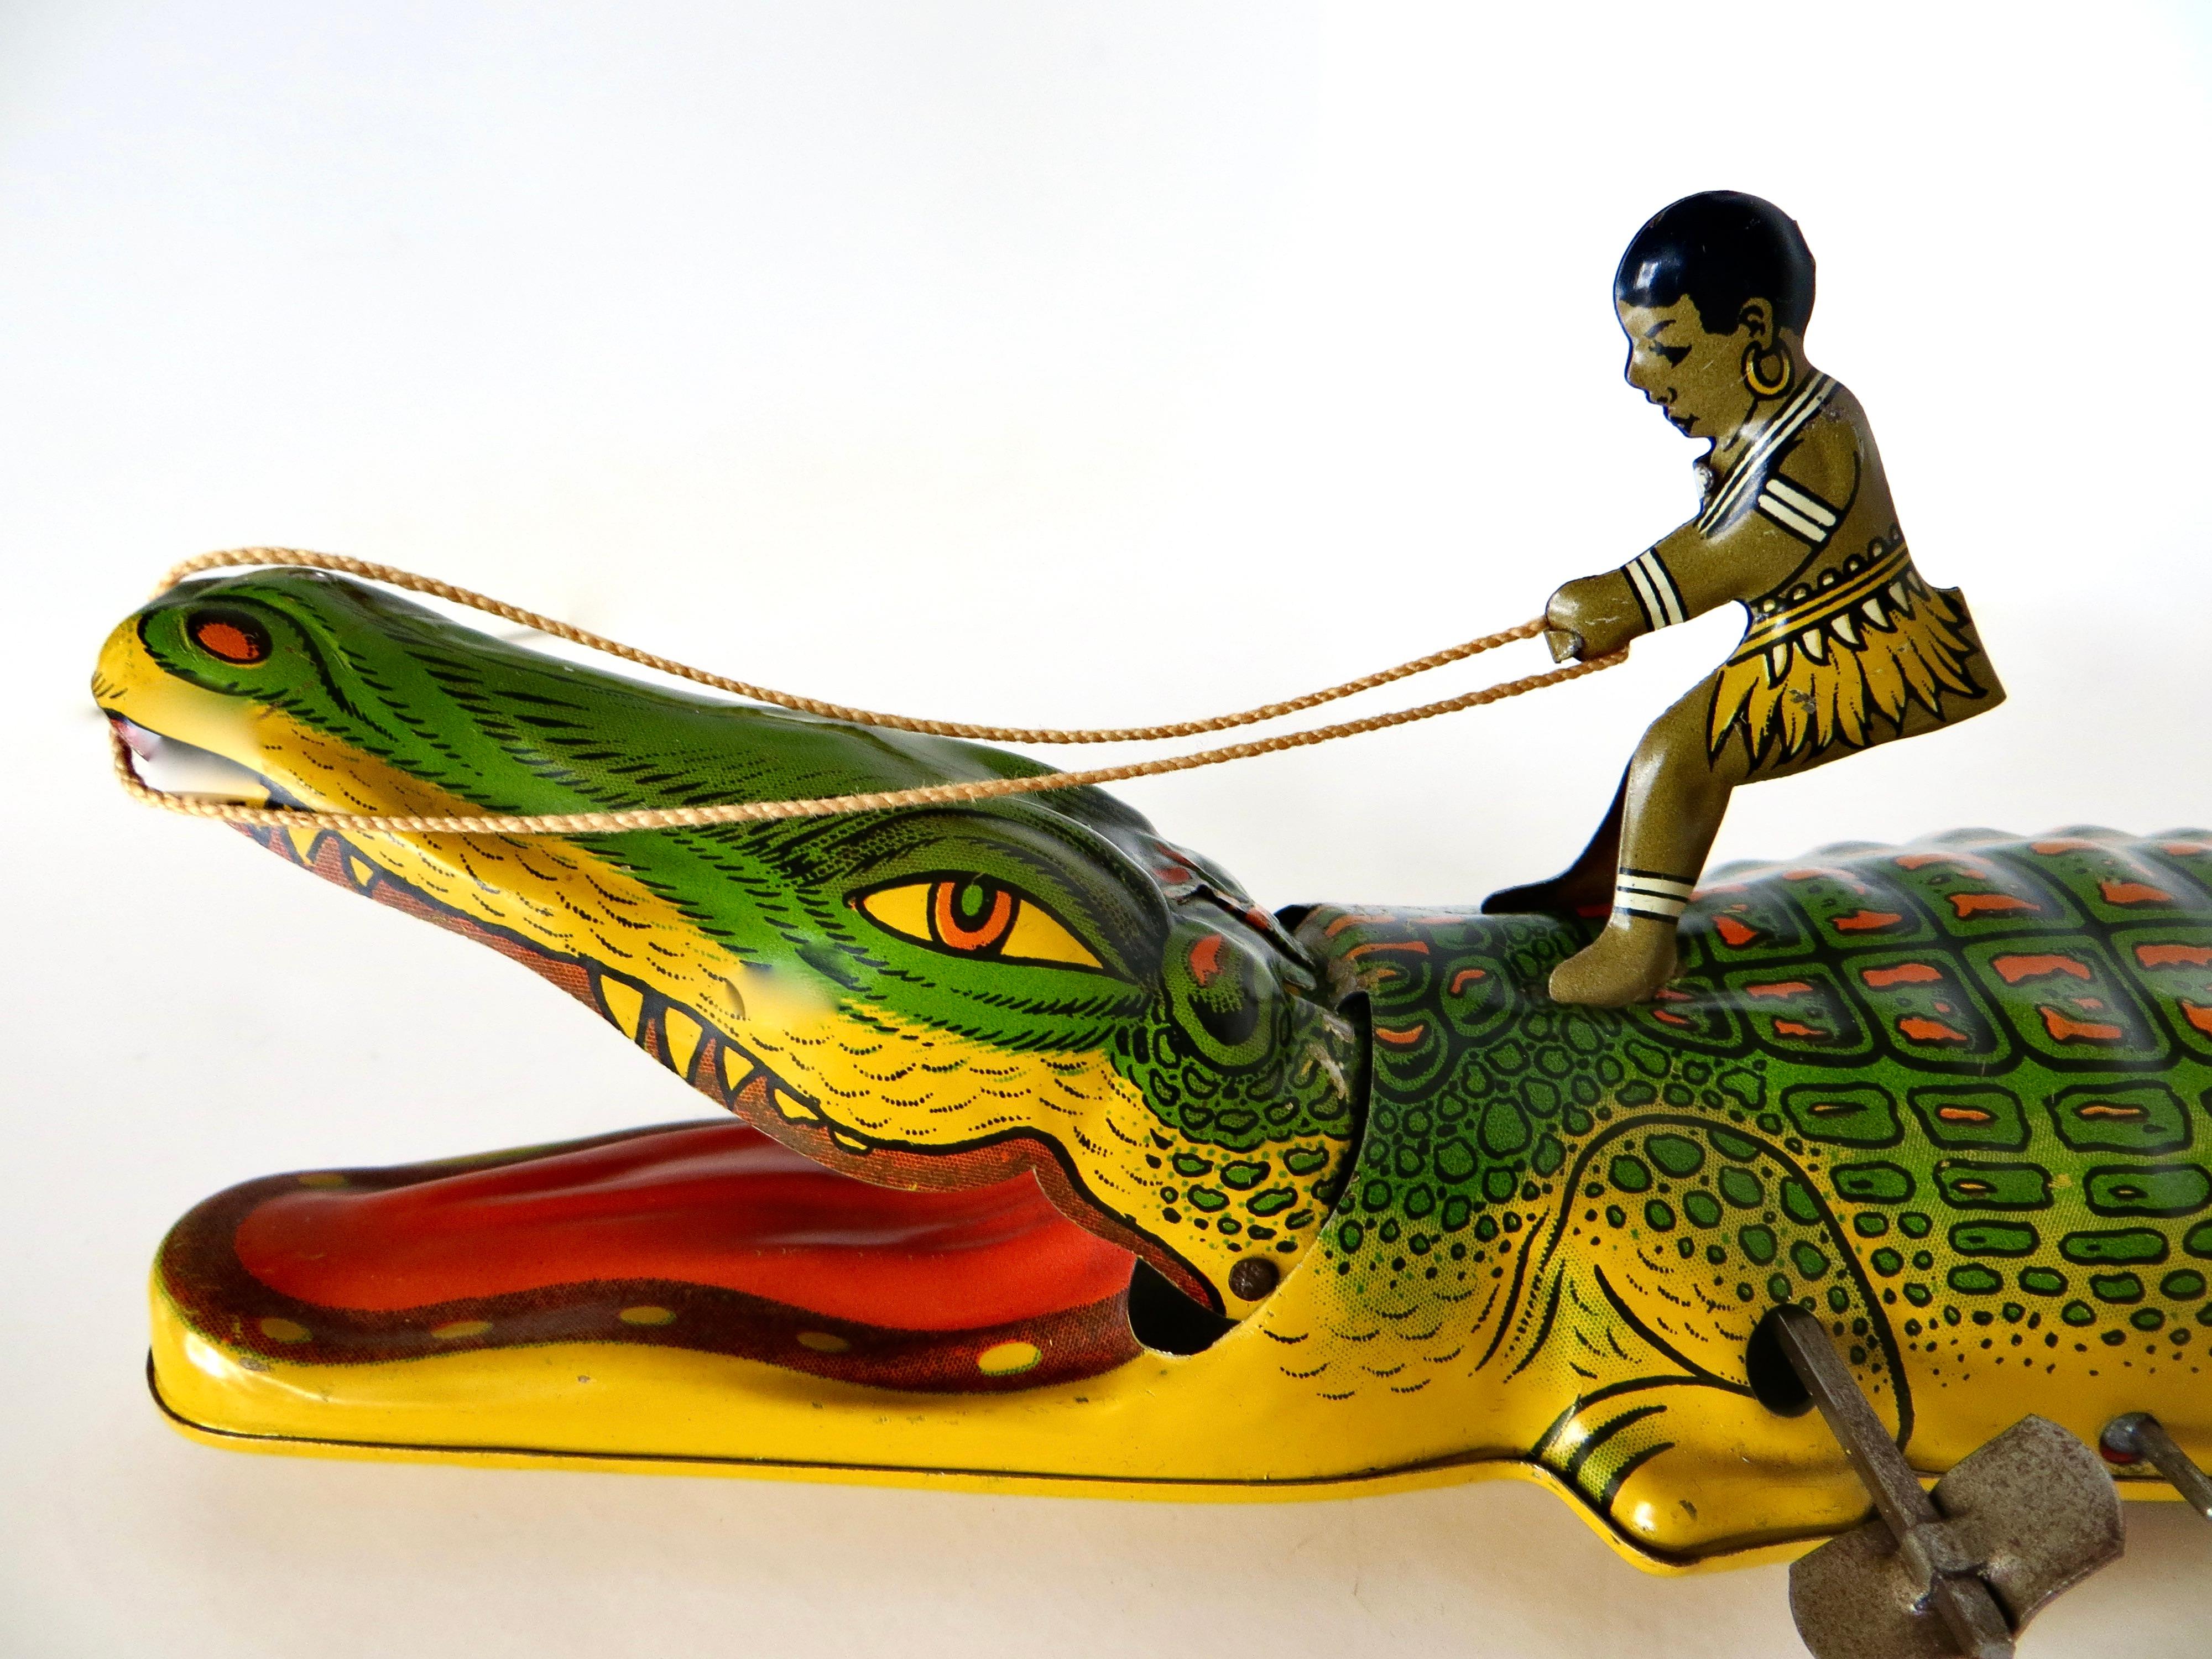 Manufactured circa 1935 by The J. Chein Company in Harrison, New Jersey, this vintage tin toy, when wound up, depicts a young boy in islander garb, trying to ride an alligator who dashes across the floor opening and closing his mouth.
Unlike most